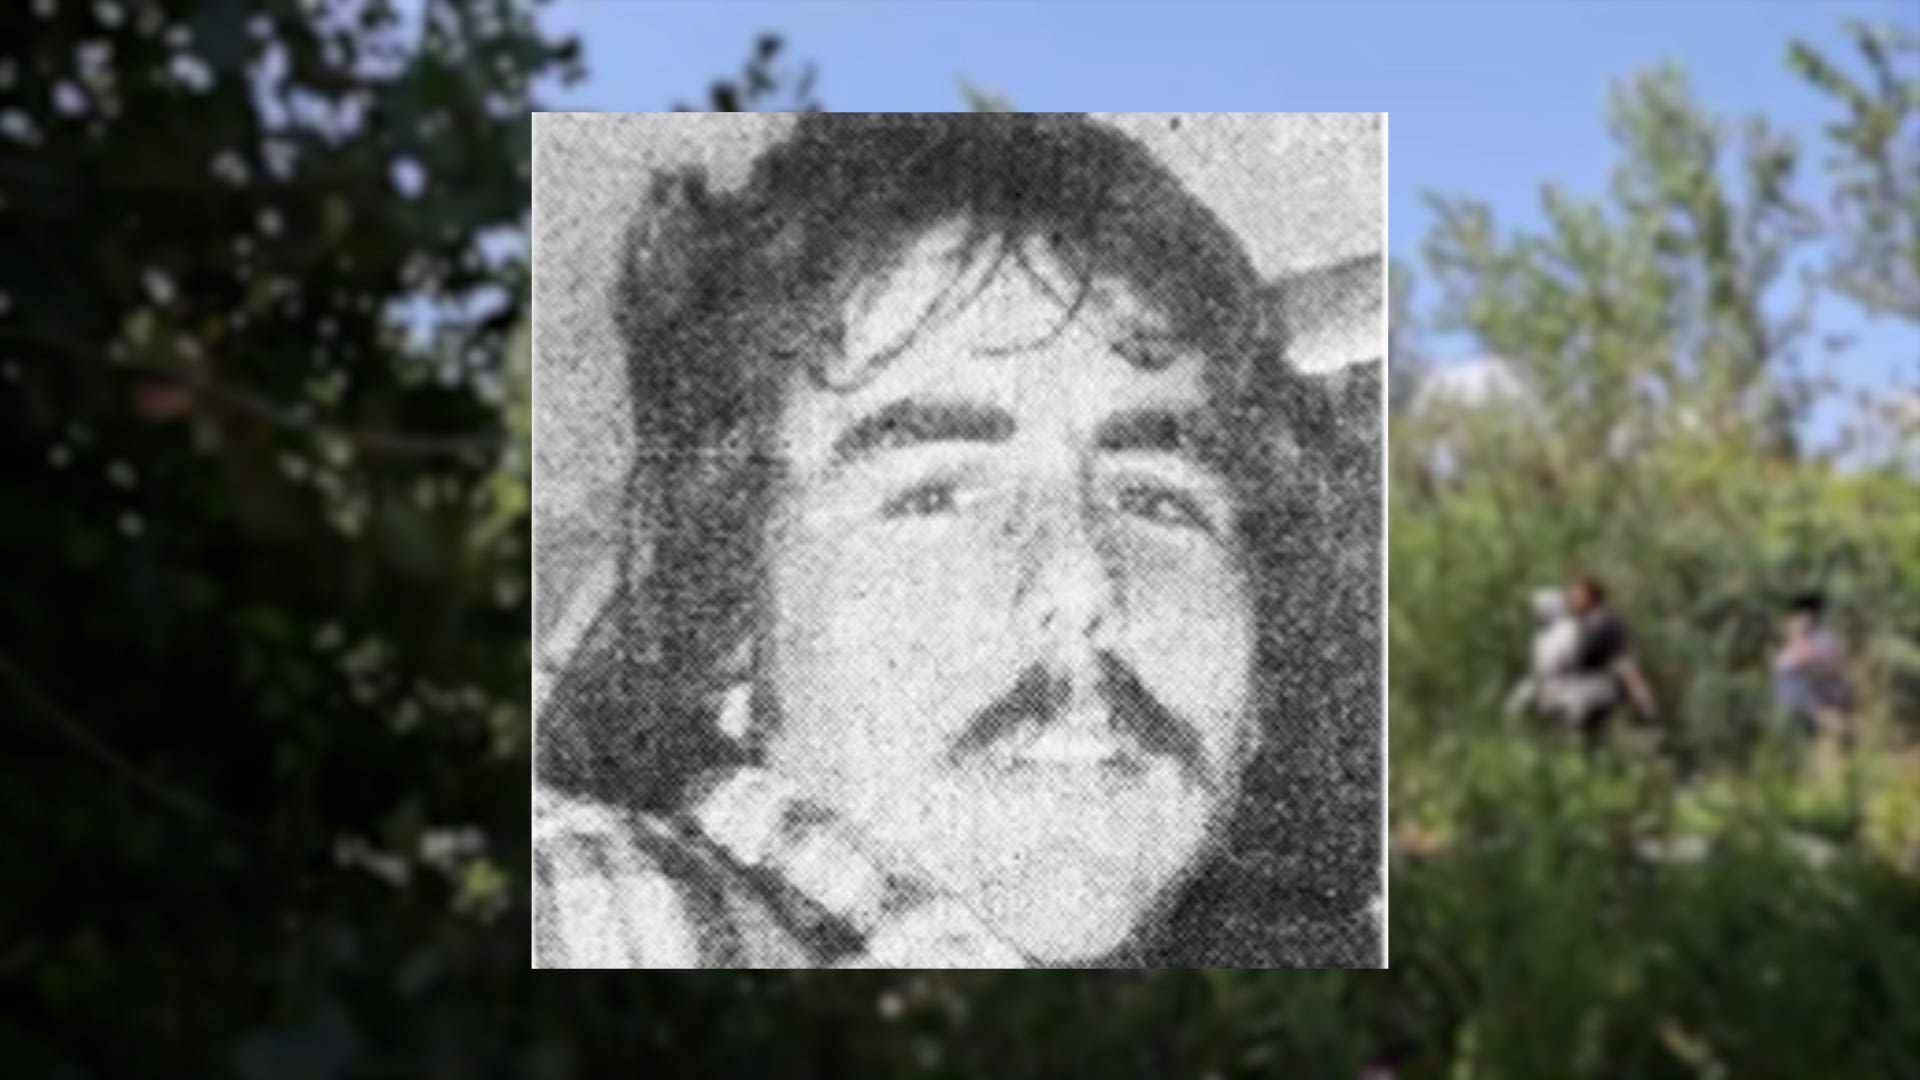 Funeral services scheduled for Maywood's Charles Murphy 42 years after he went missing